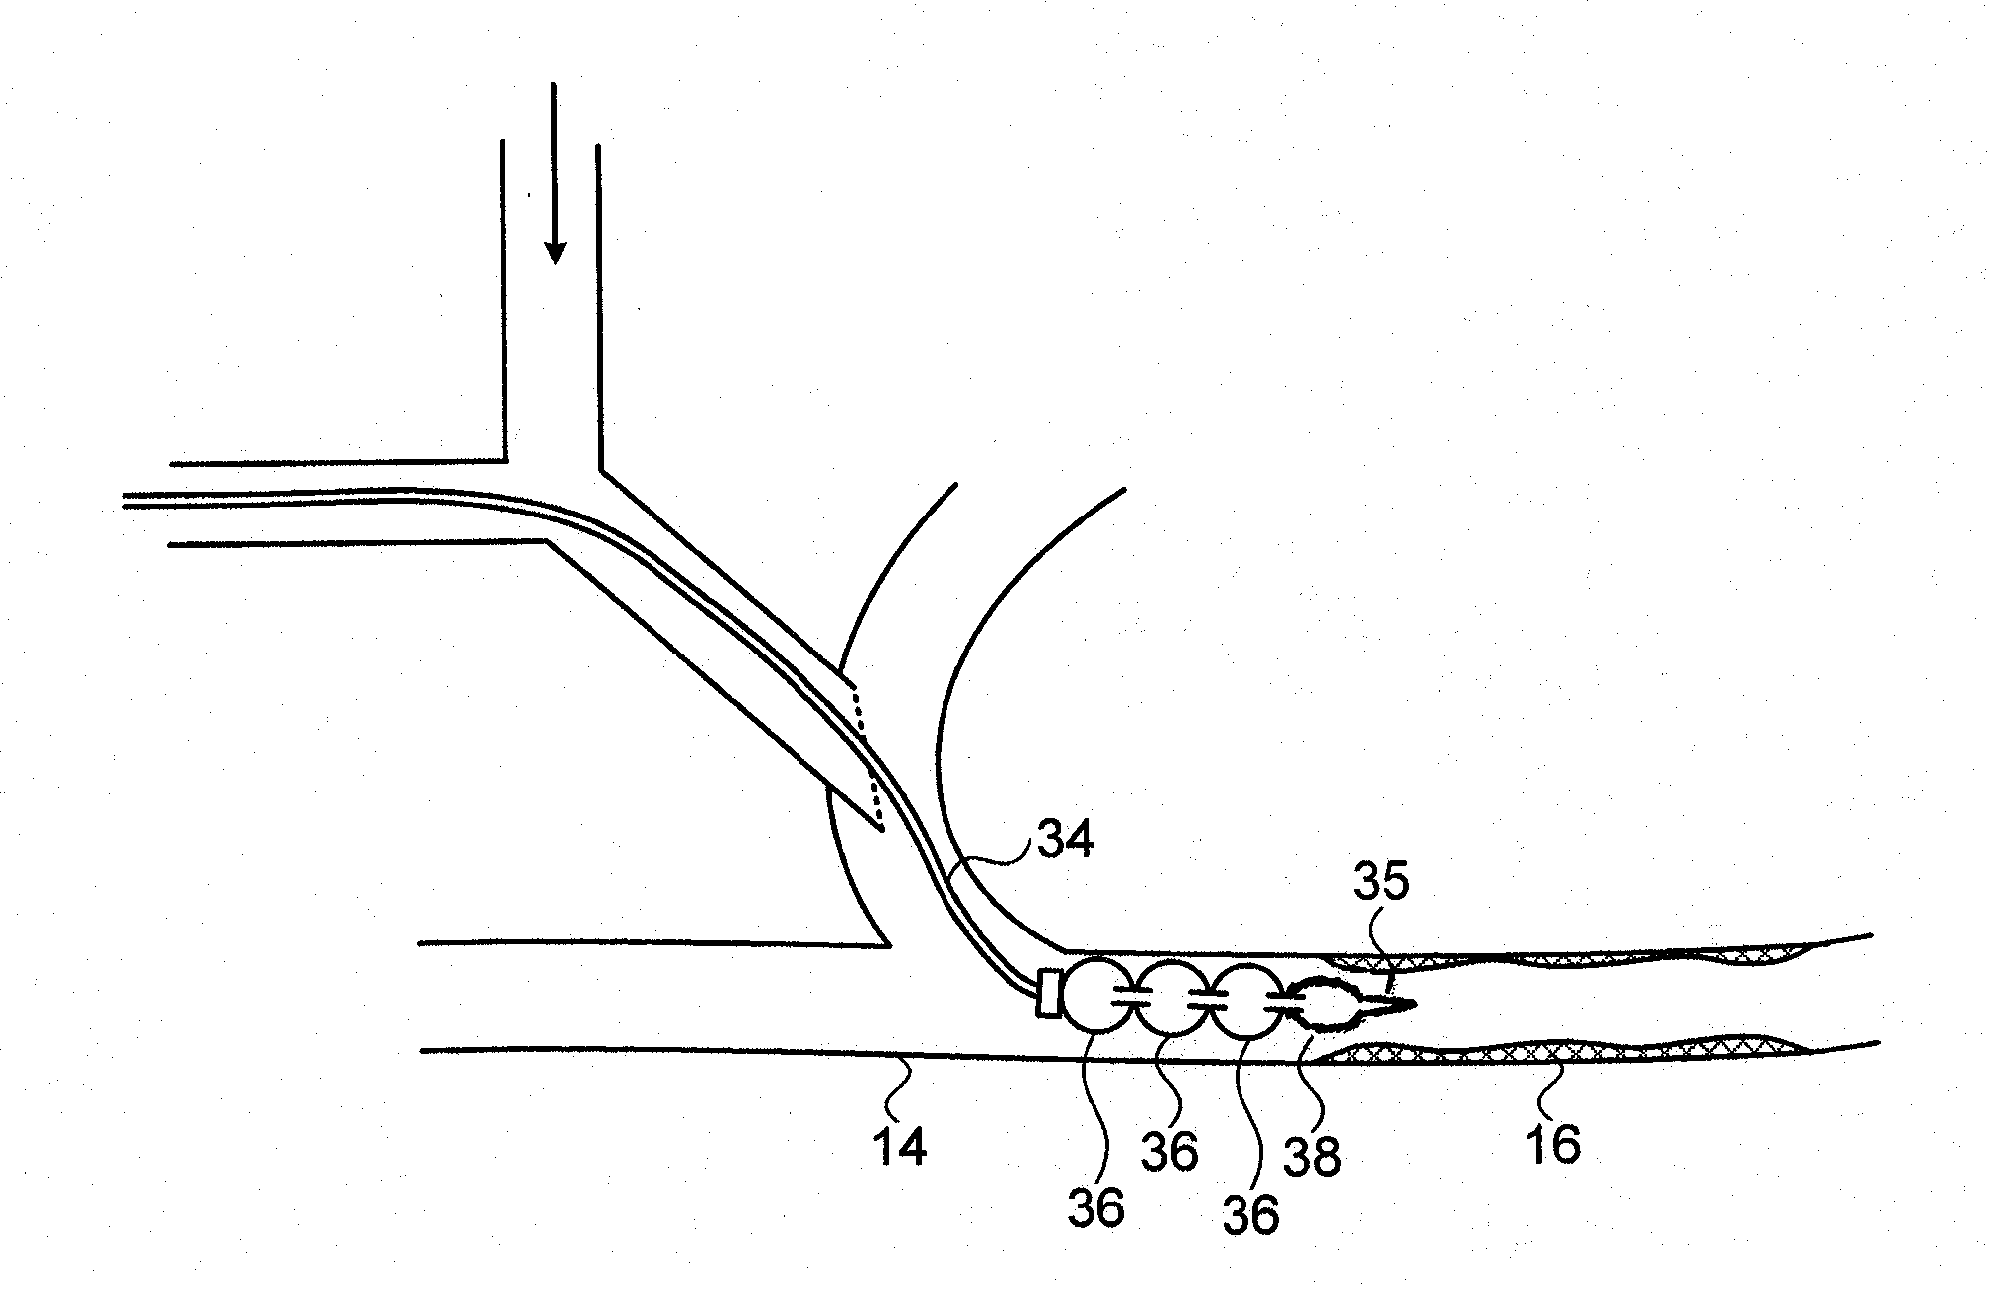 Device for prevention of shunt stenosis